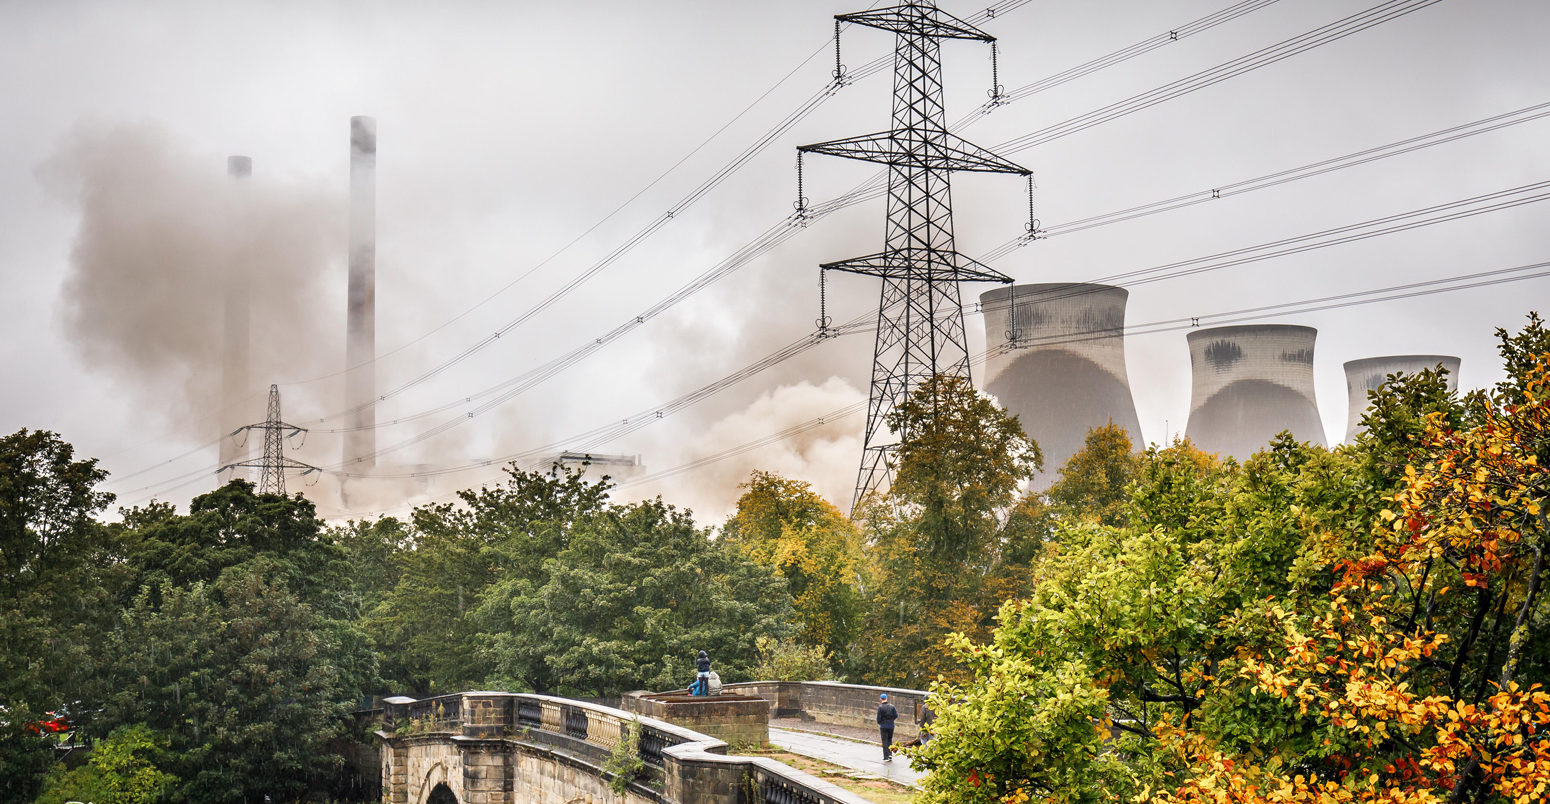 Four massive cooling towers at the Ferrybridge C coal fired power station are destroyed in a controlled explosion. Ferrybridge, near Leeds, UK. 13 October 2019. Credit: Ian Wray / Alamy Stock Photo